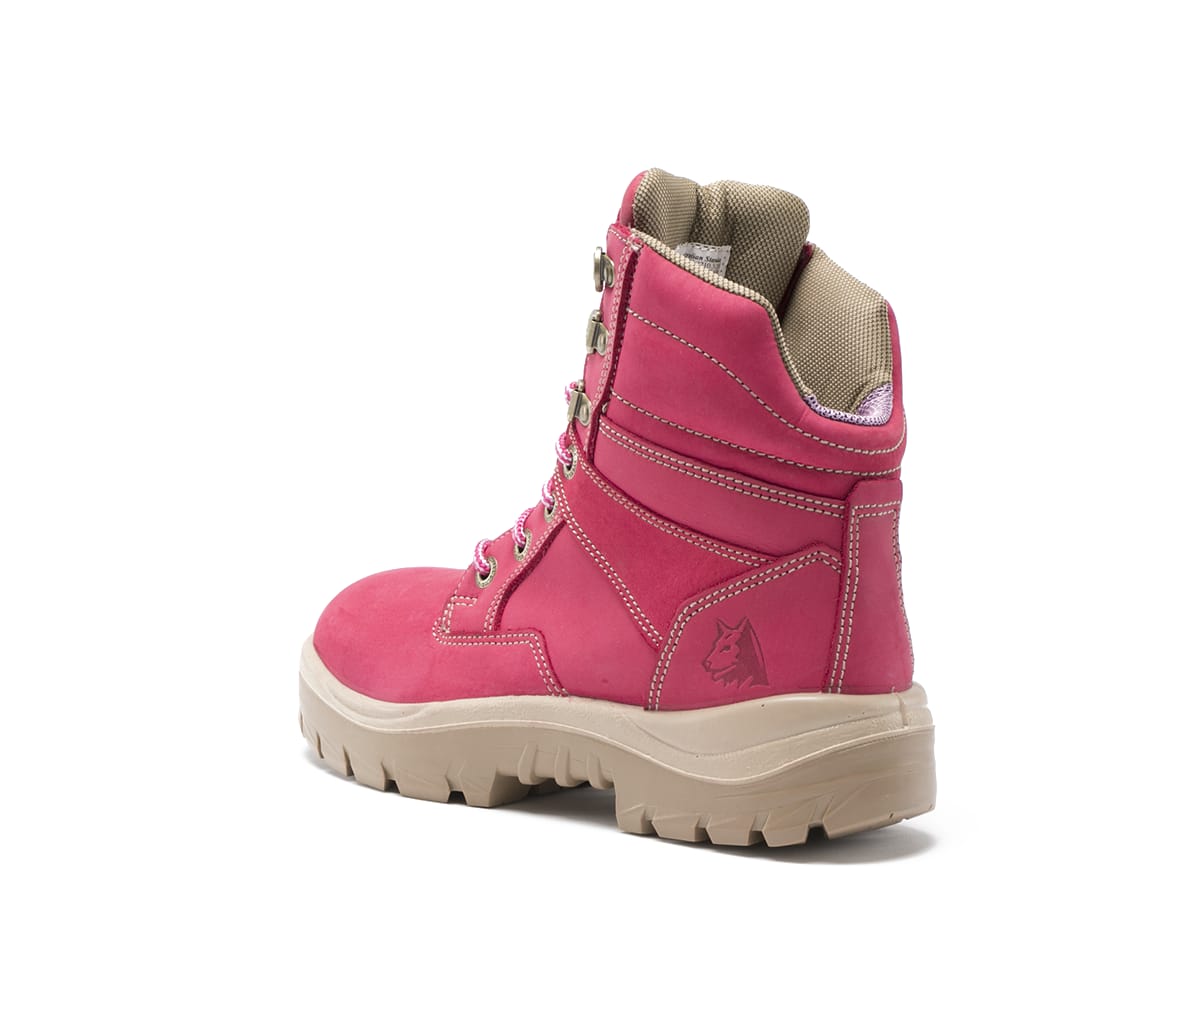 Southern Cross Ladies Pink Work Boots 